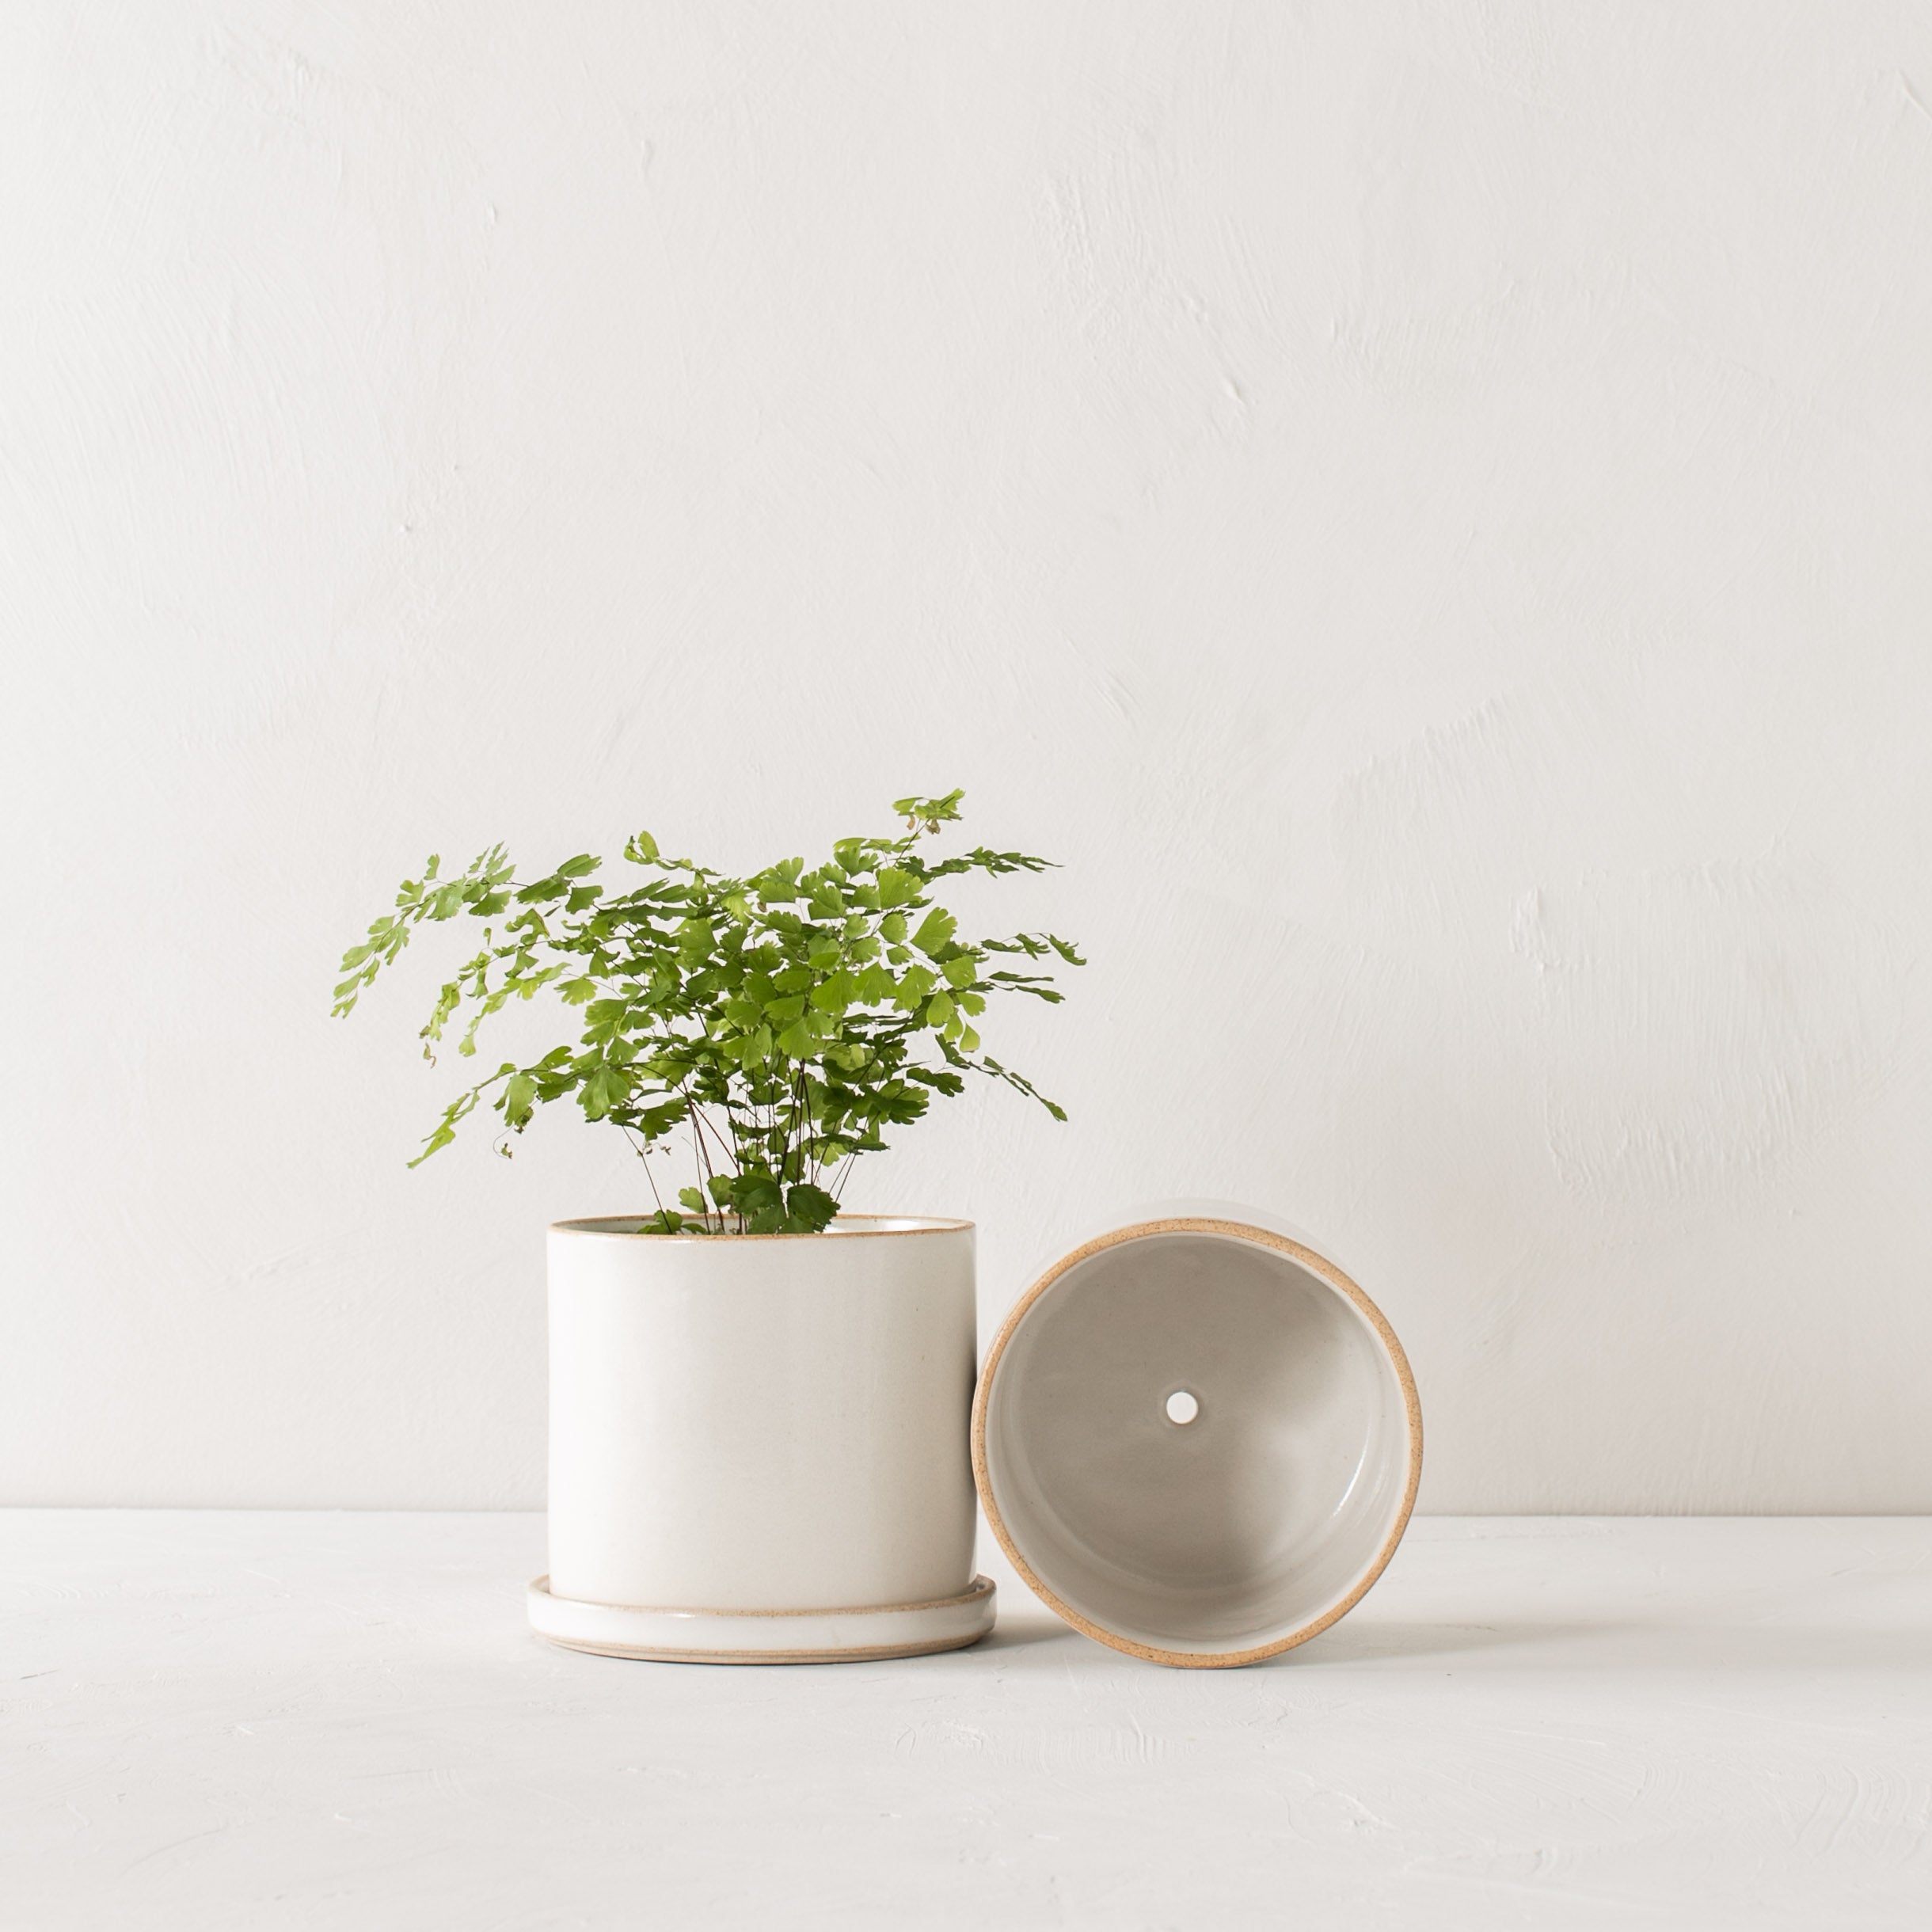 Two minimal white ceramic planters side by side. 6 inch planter and bottom dish stood upright, the other laying on its side to show off the drainage hole. Handmade ceramic planter, designed by Convivial Production, sold by Shop Verdant Kansas City, Mo plant store.